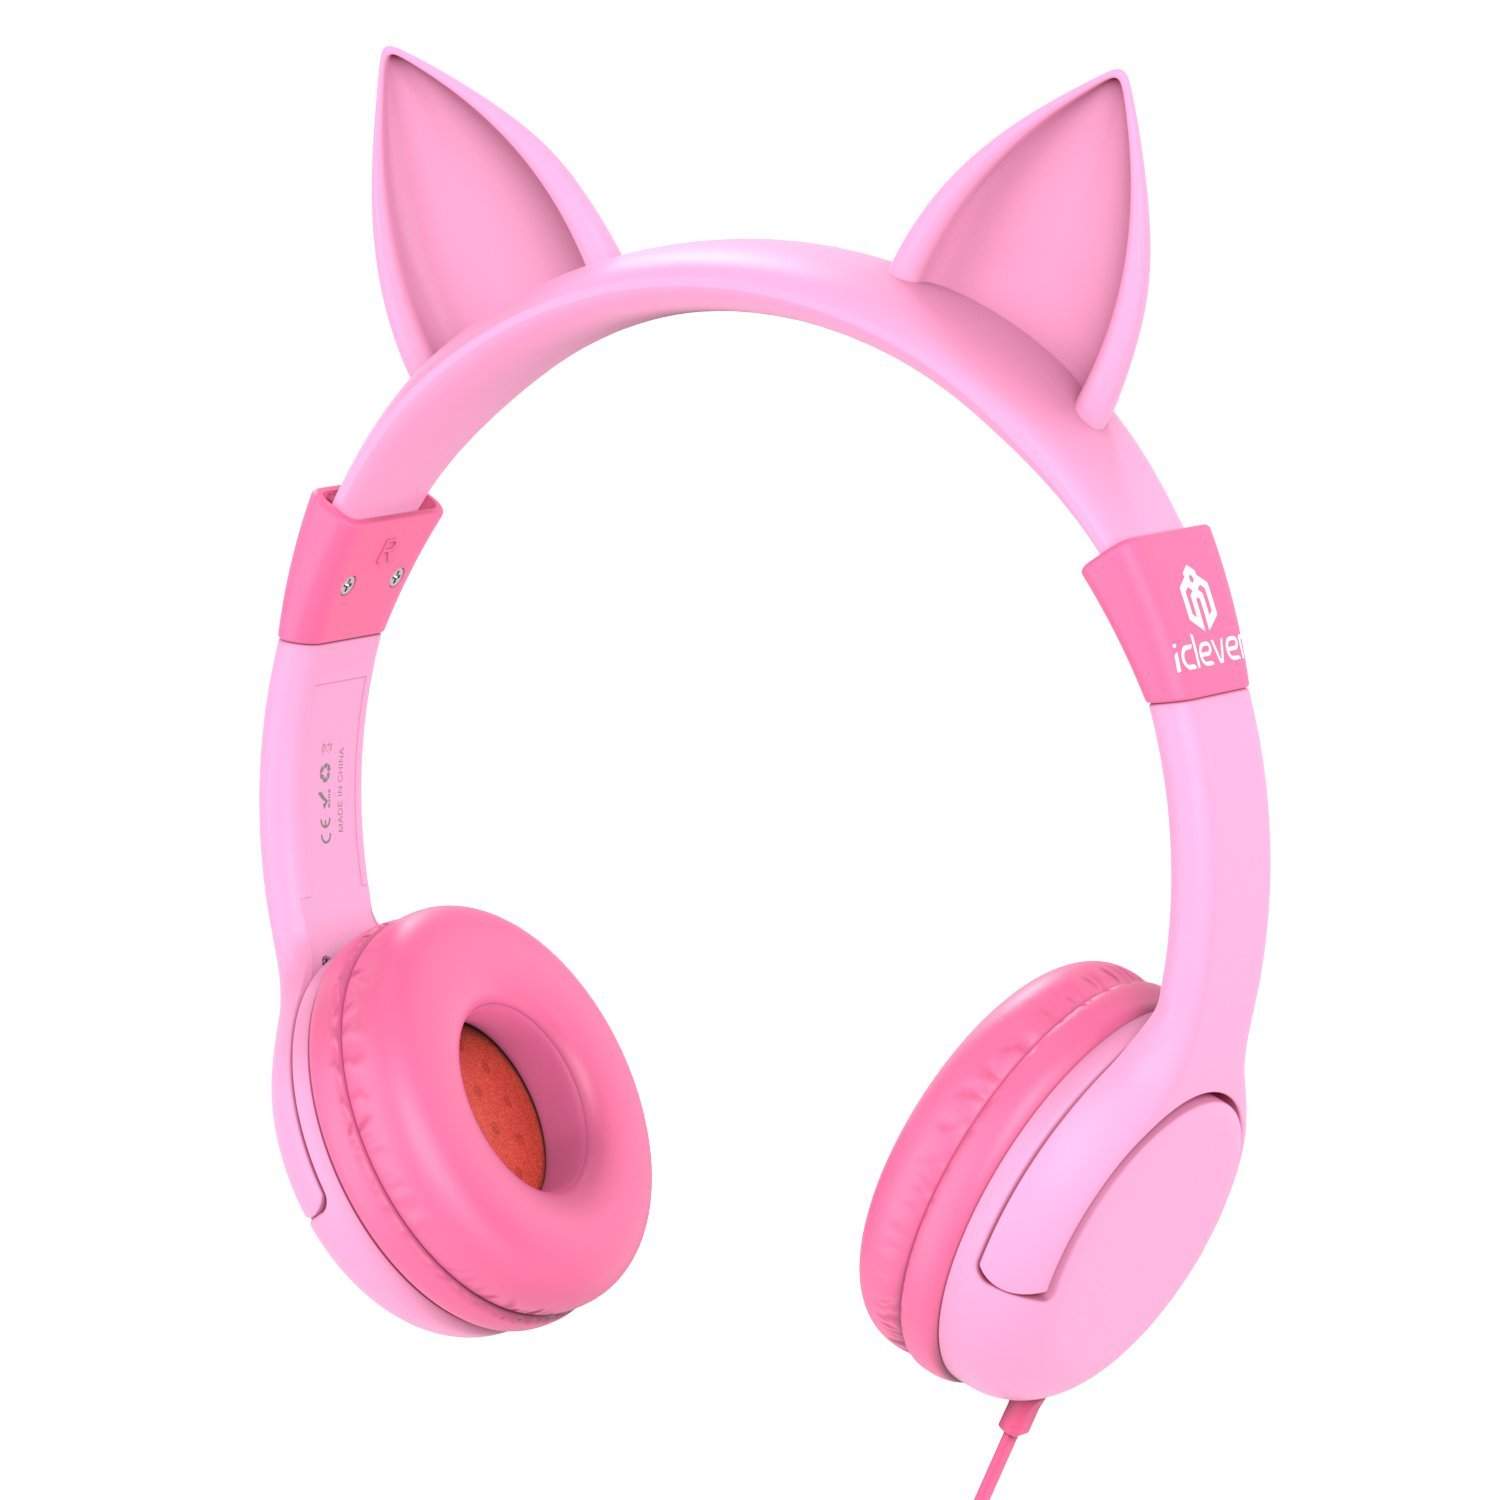 iClever BoostCare Wired Kids Cat Ear Headphones (Pink)